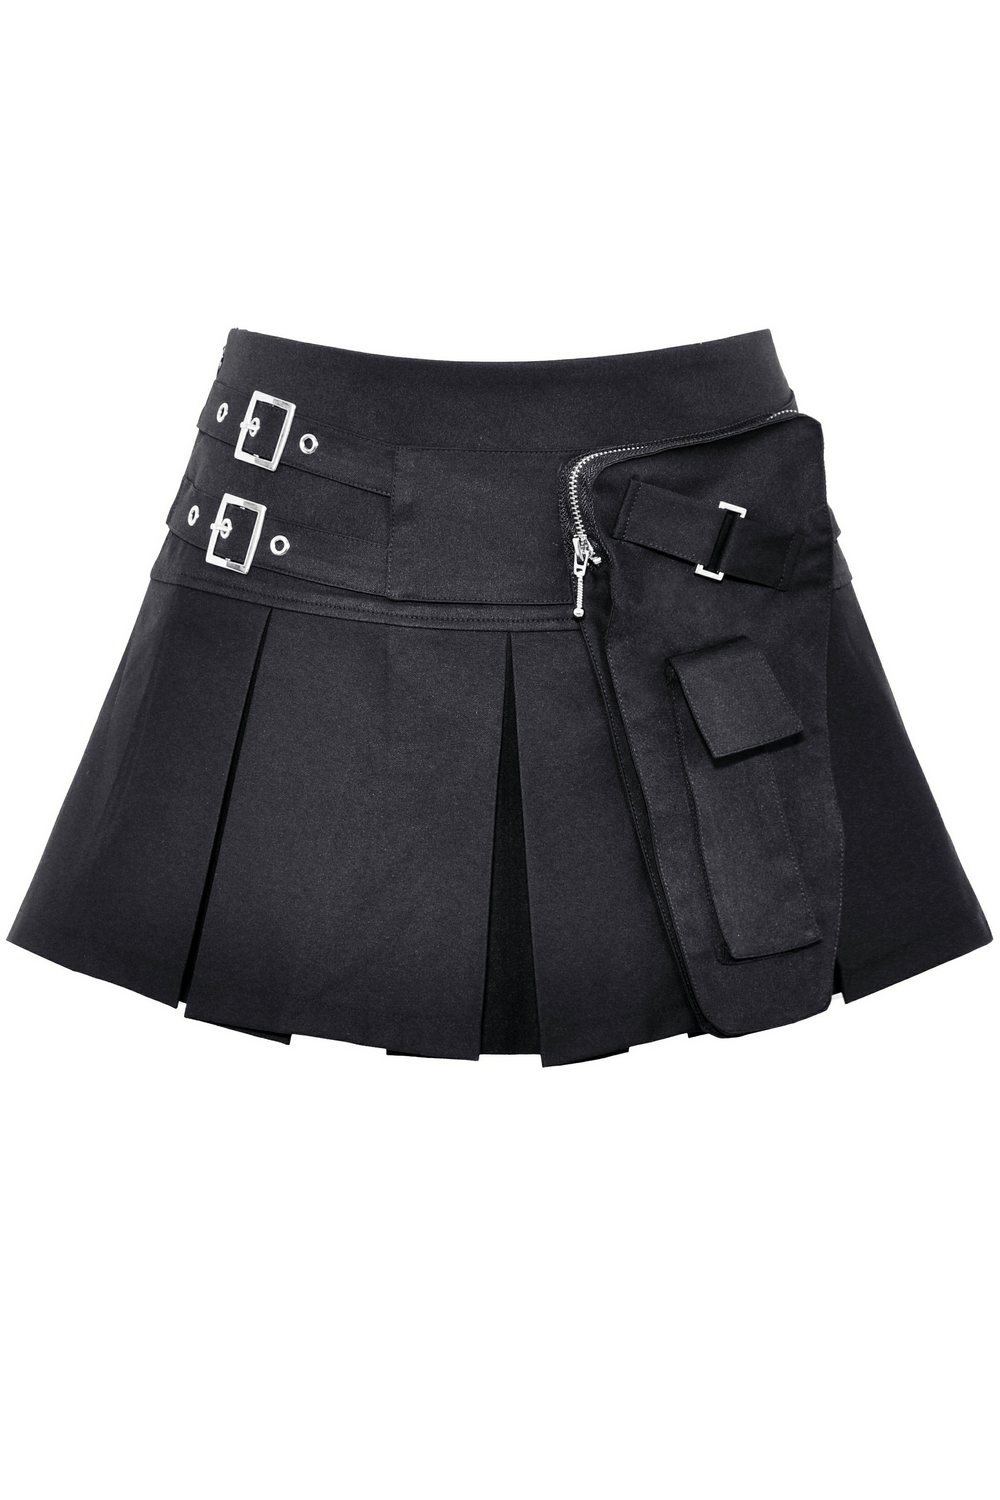 Stylish Pleated Mini Skirt with Punk Rock Buckle Detail